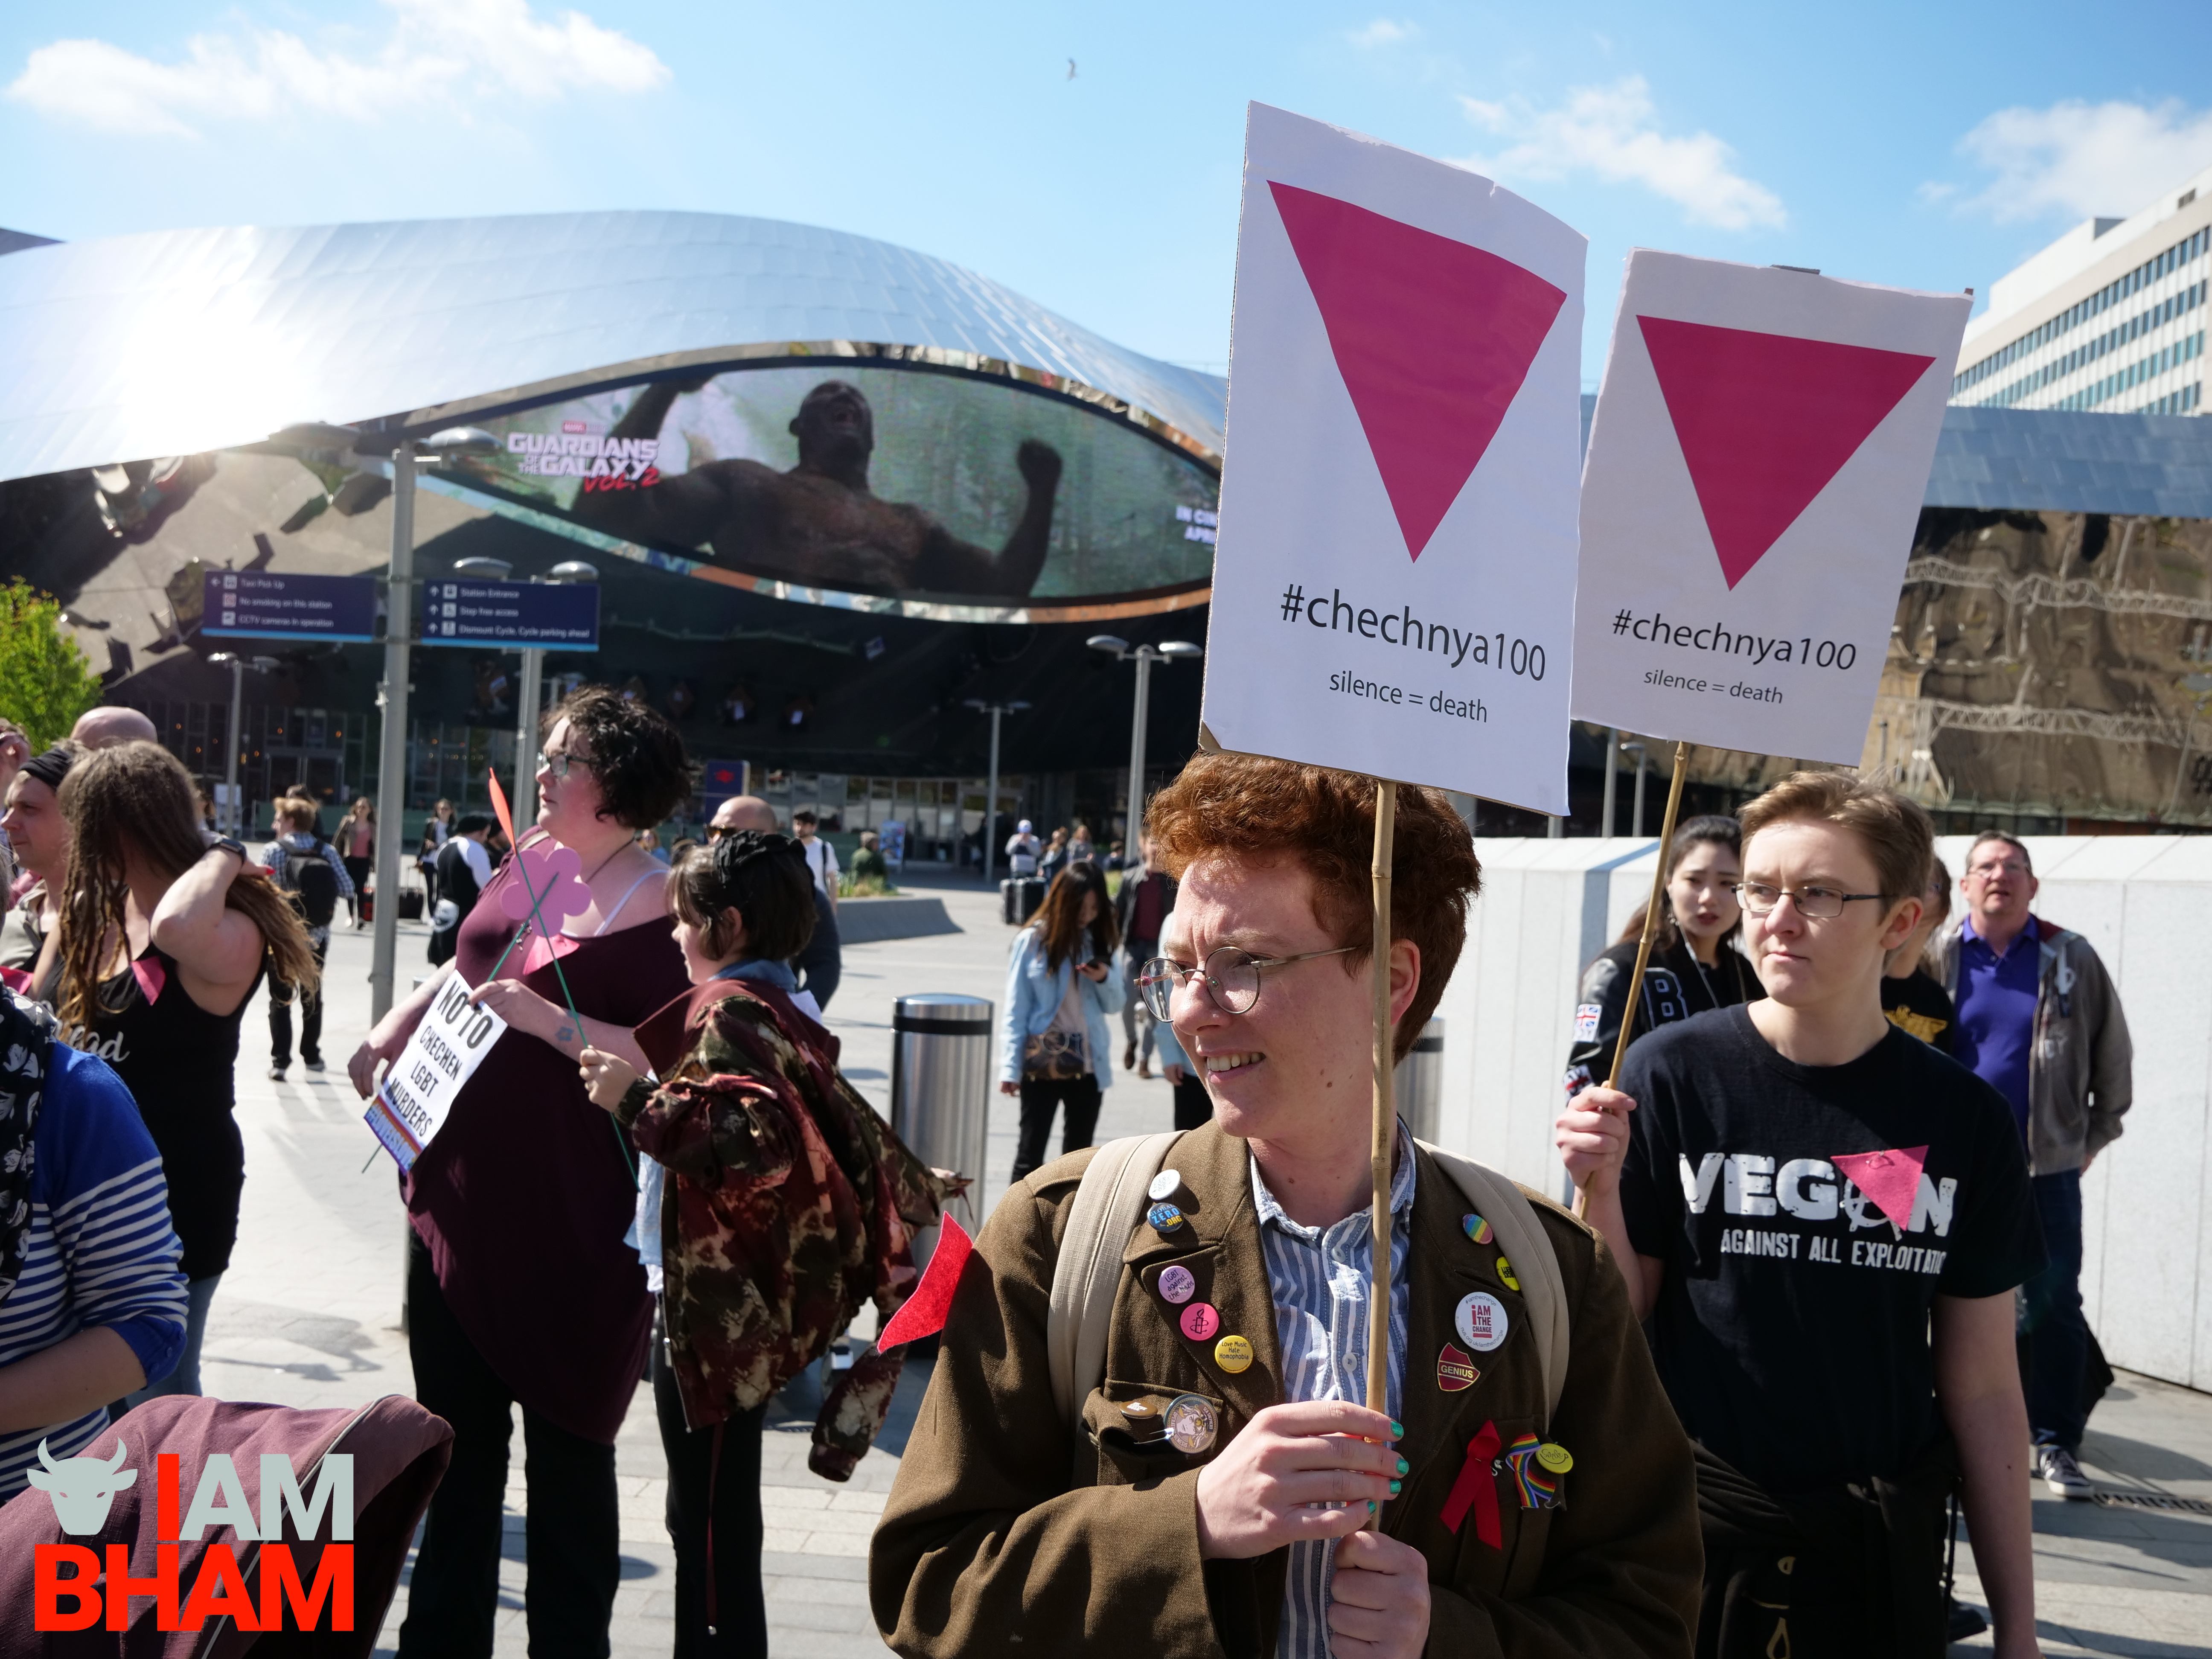 Birmingham LGBT+ allies and supporters gathered in Birmingham to condemn the human rights abuses in Chechnya (Photograph: Adam Yosef)